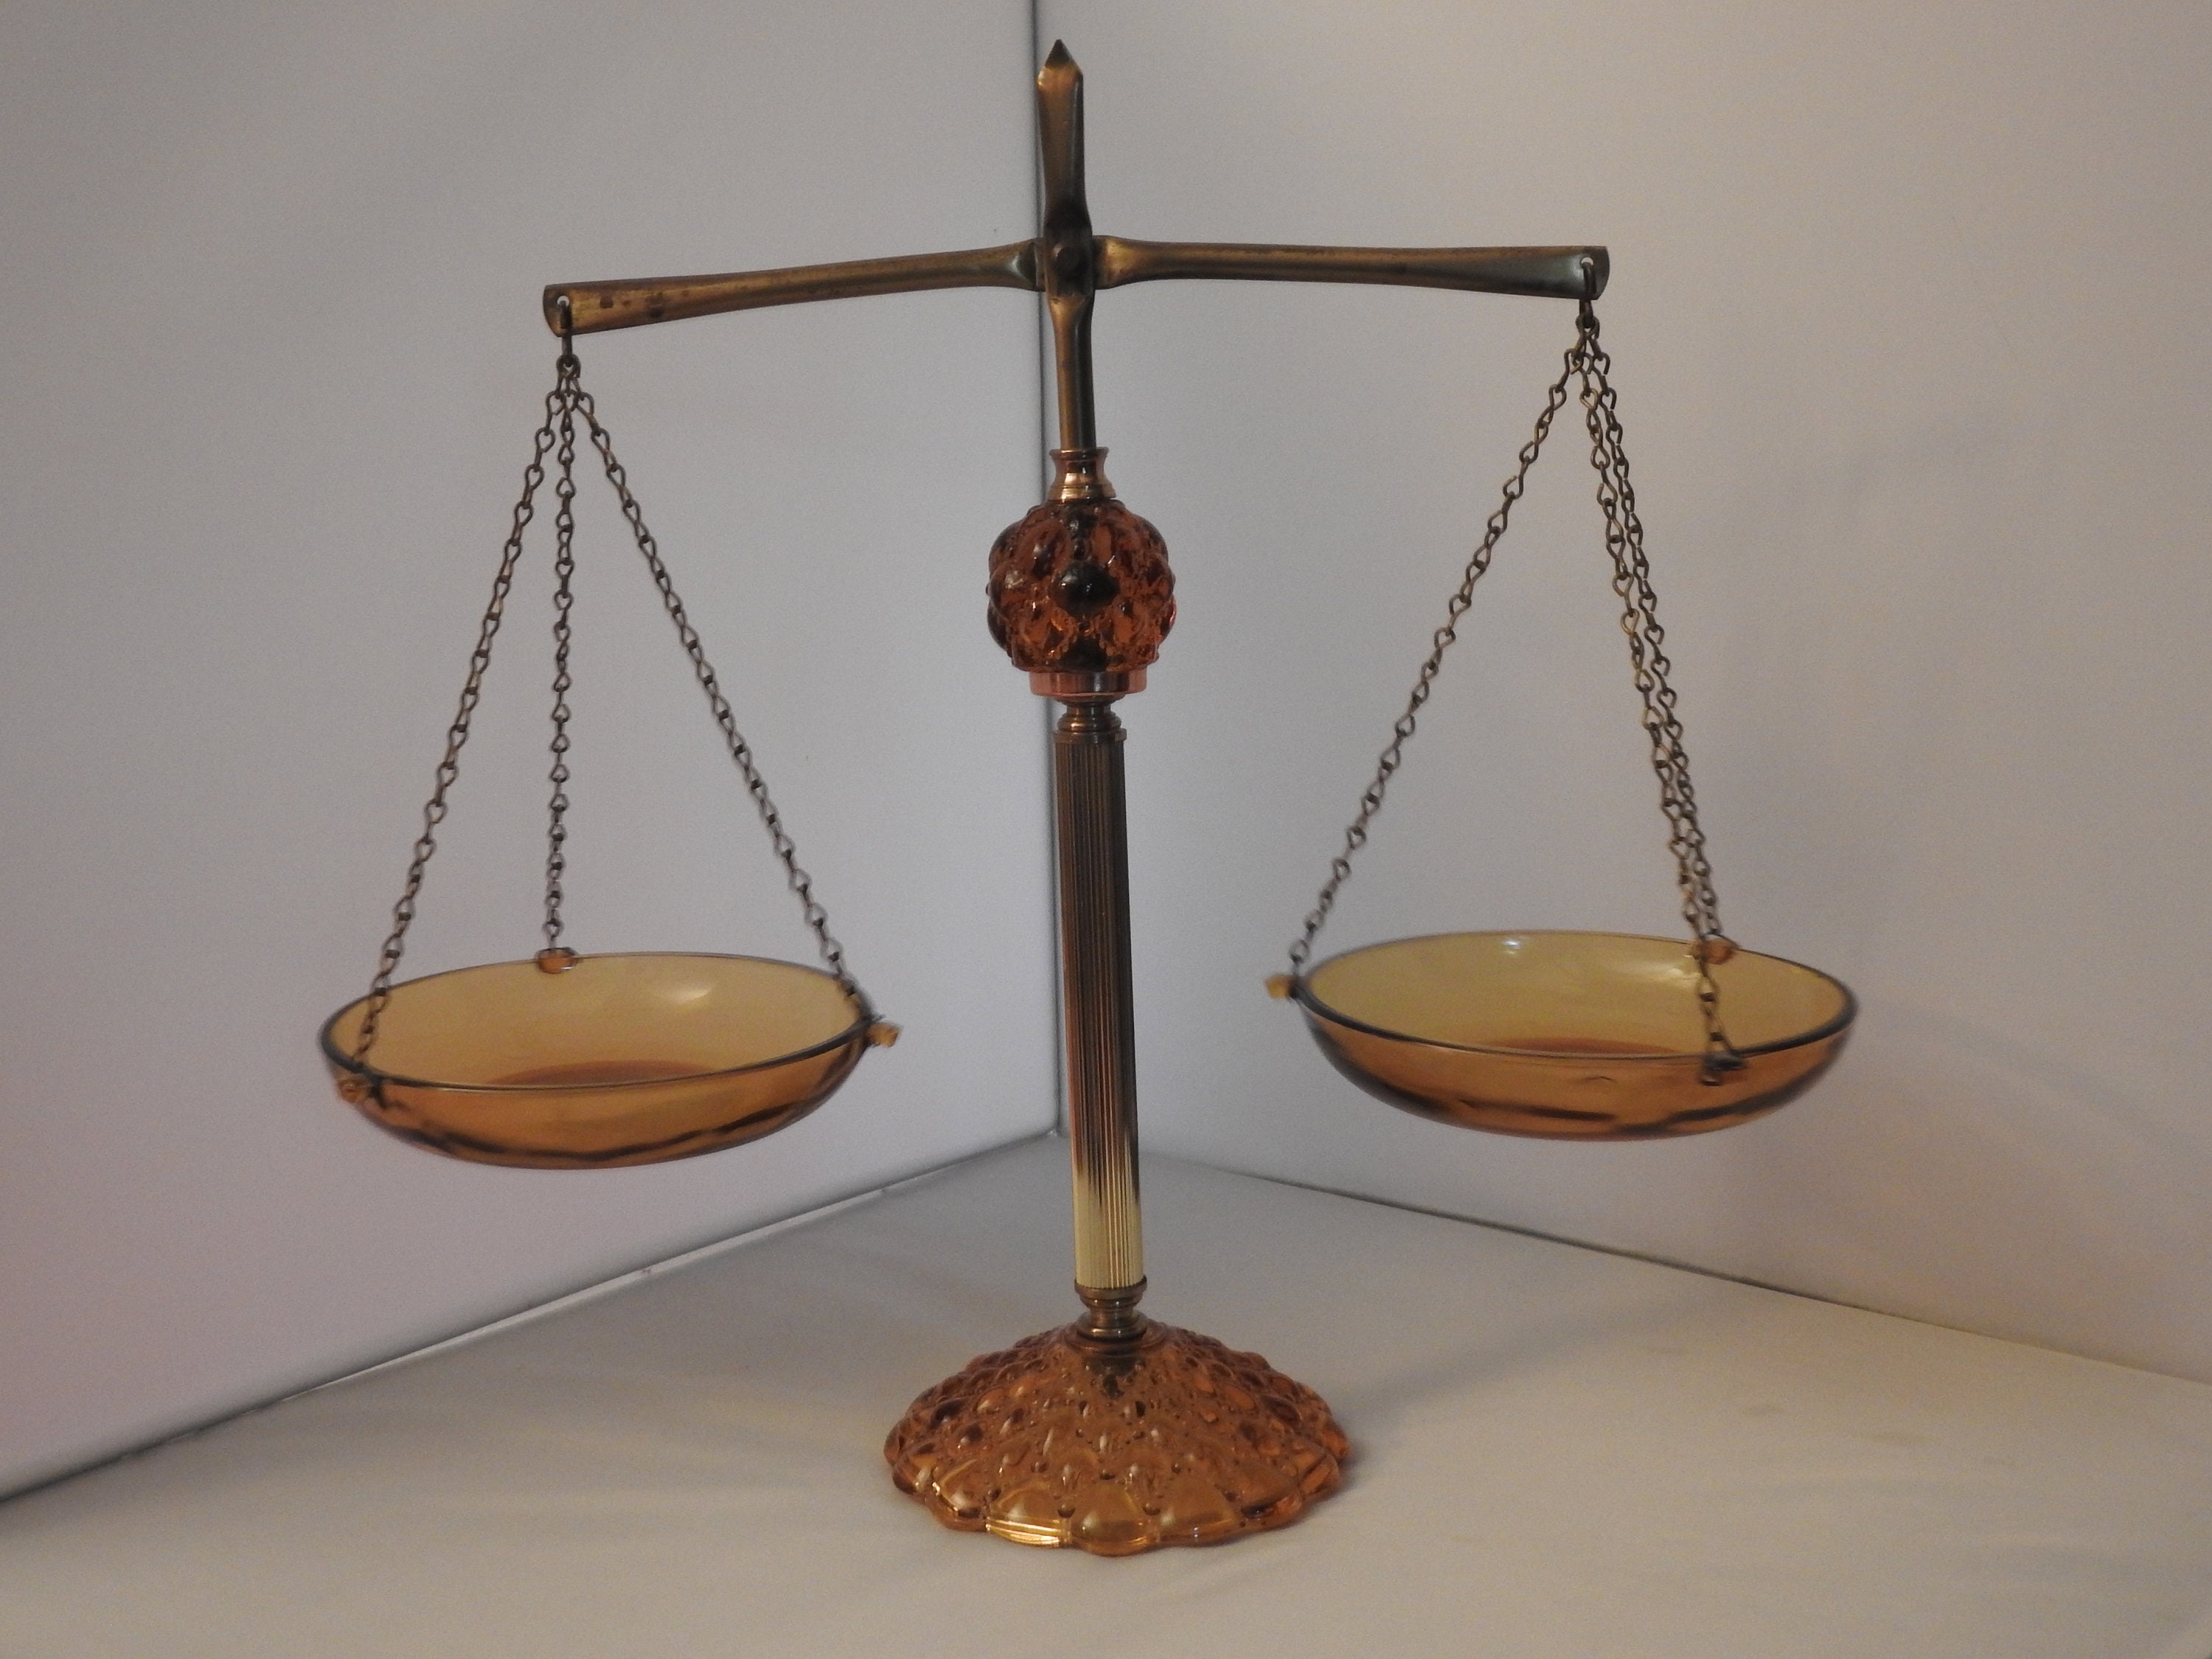 Vintage Style Metal Balance Scale, Decorative Antique Weight Balancing Scale,  Lawyer Scale of Justice, Jewelry Tower Tray, Farmhouse Candleholder 